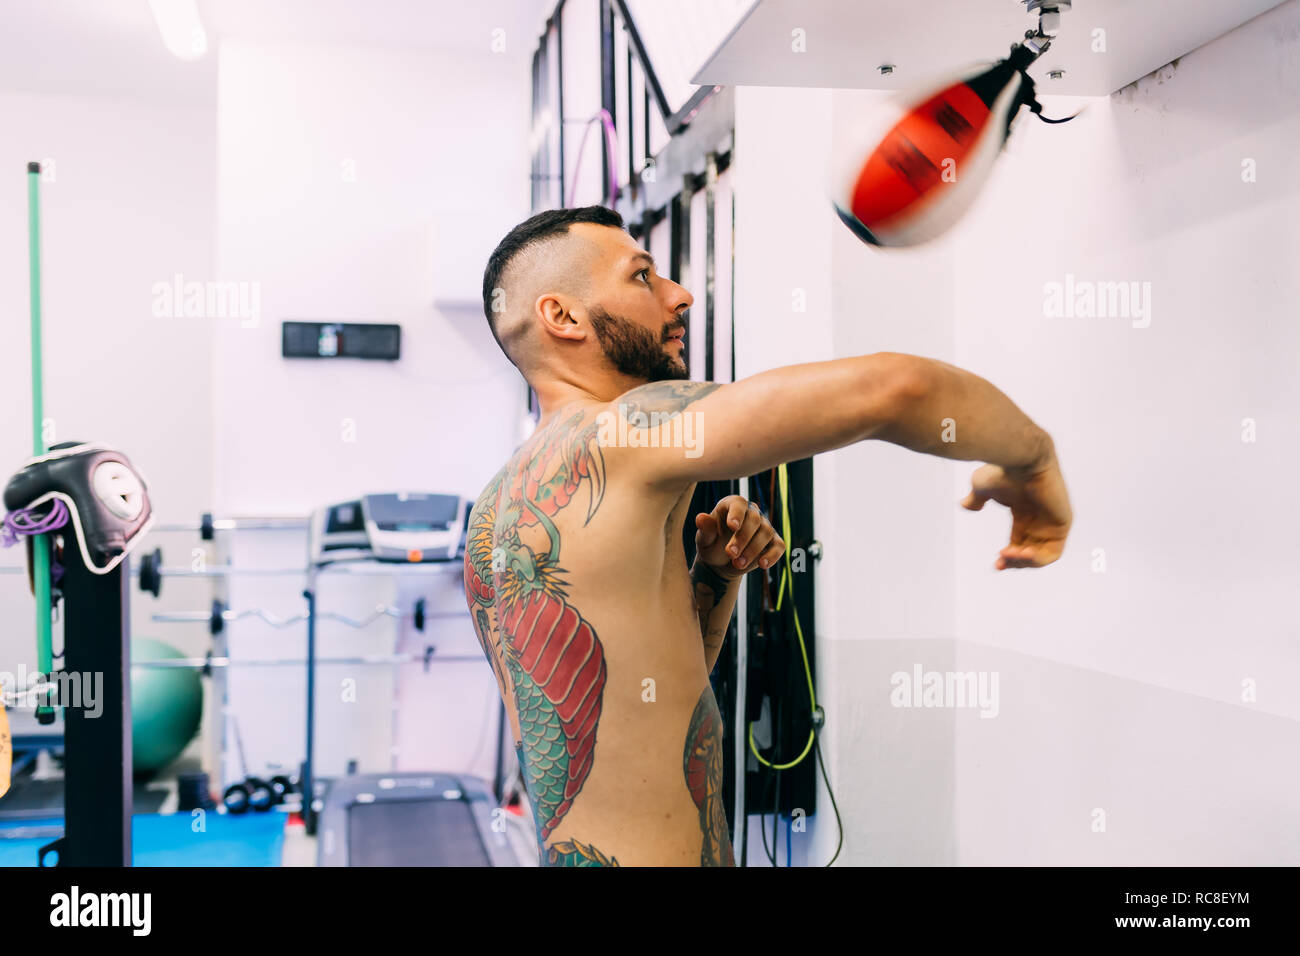 Man using punch bag in gym Stock Photo